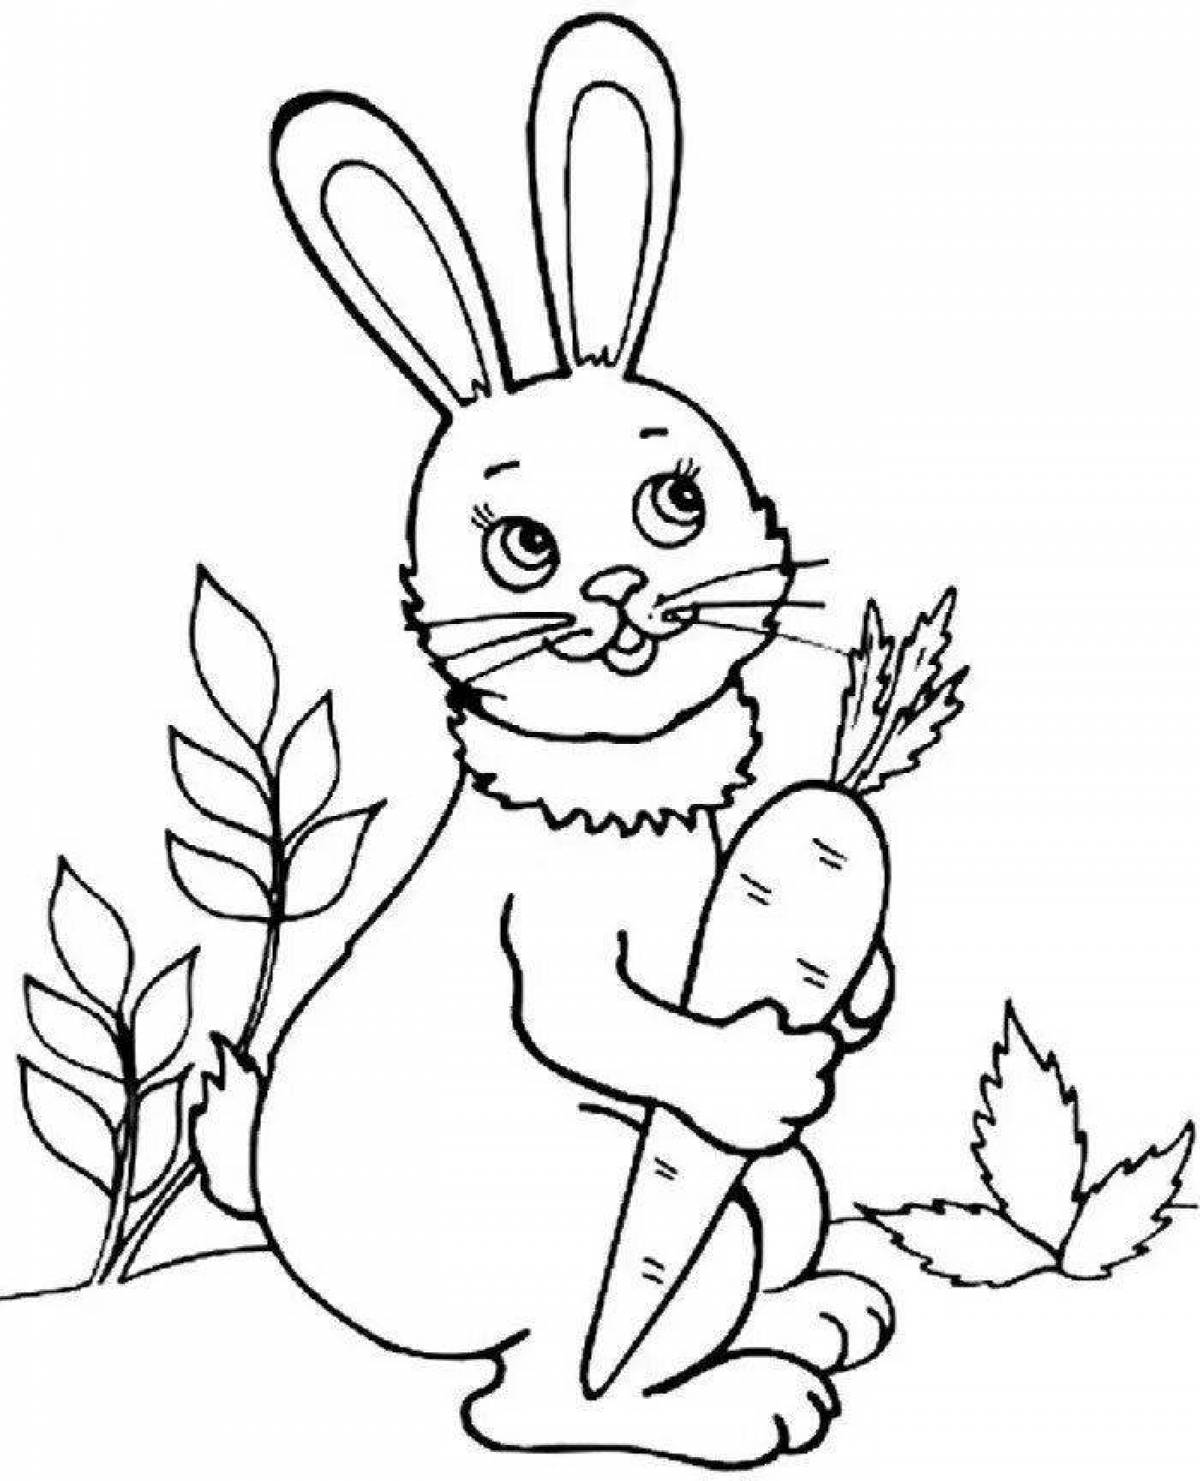 Hare drawing #2